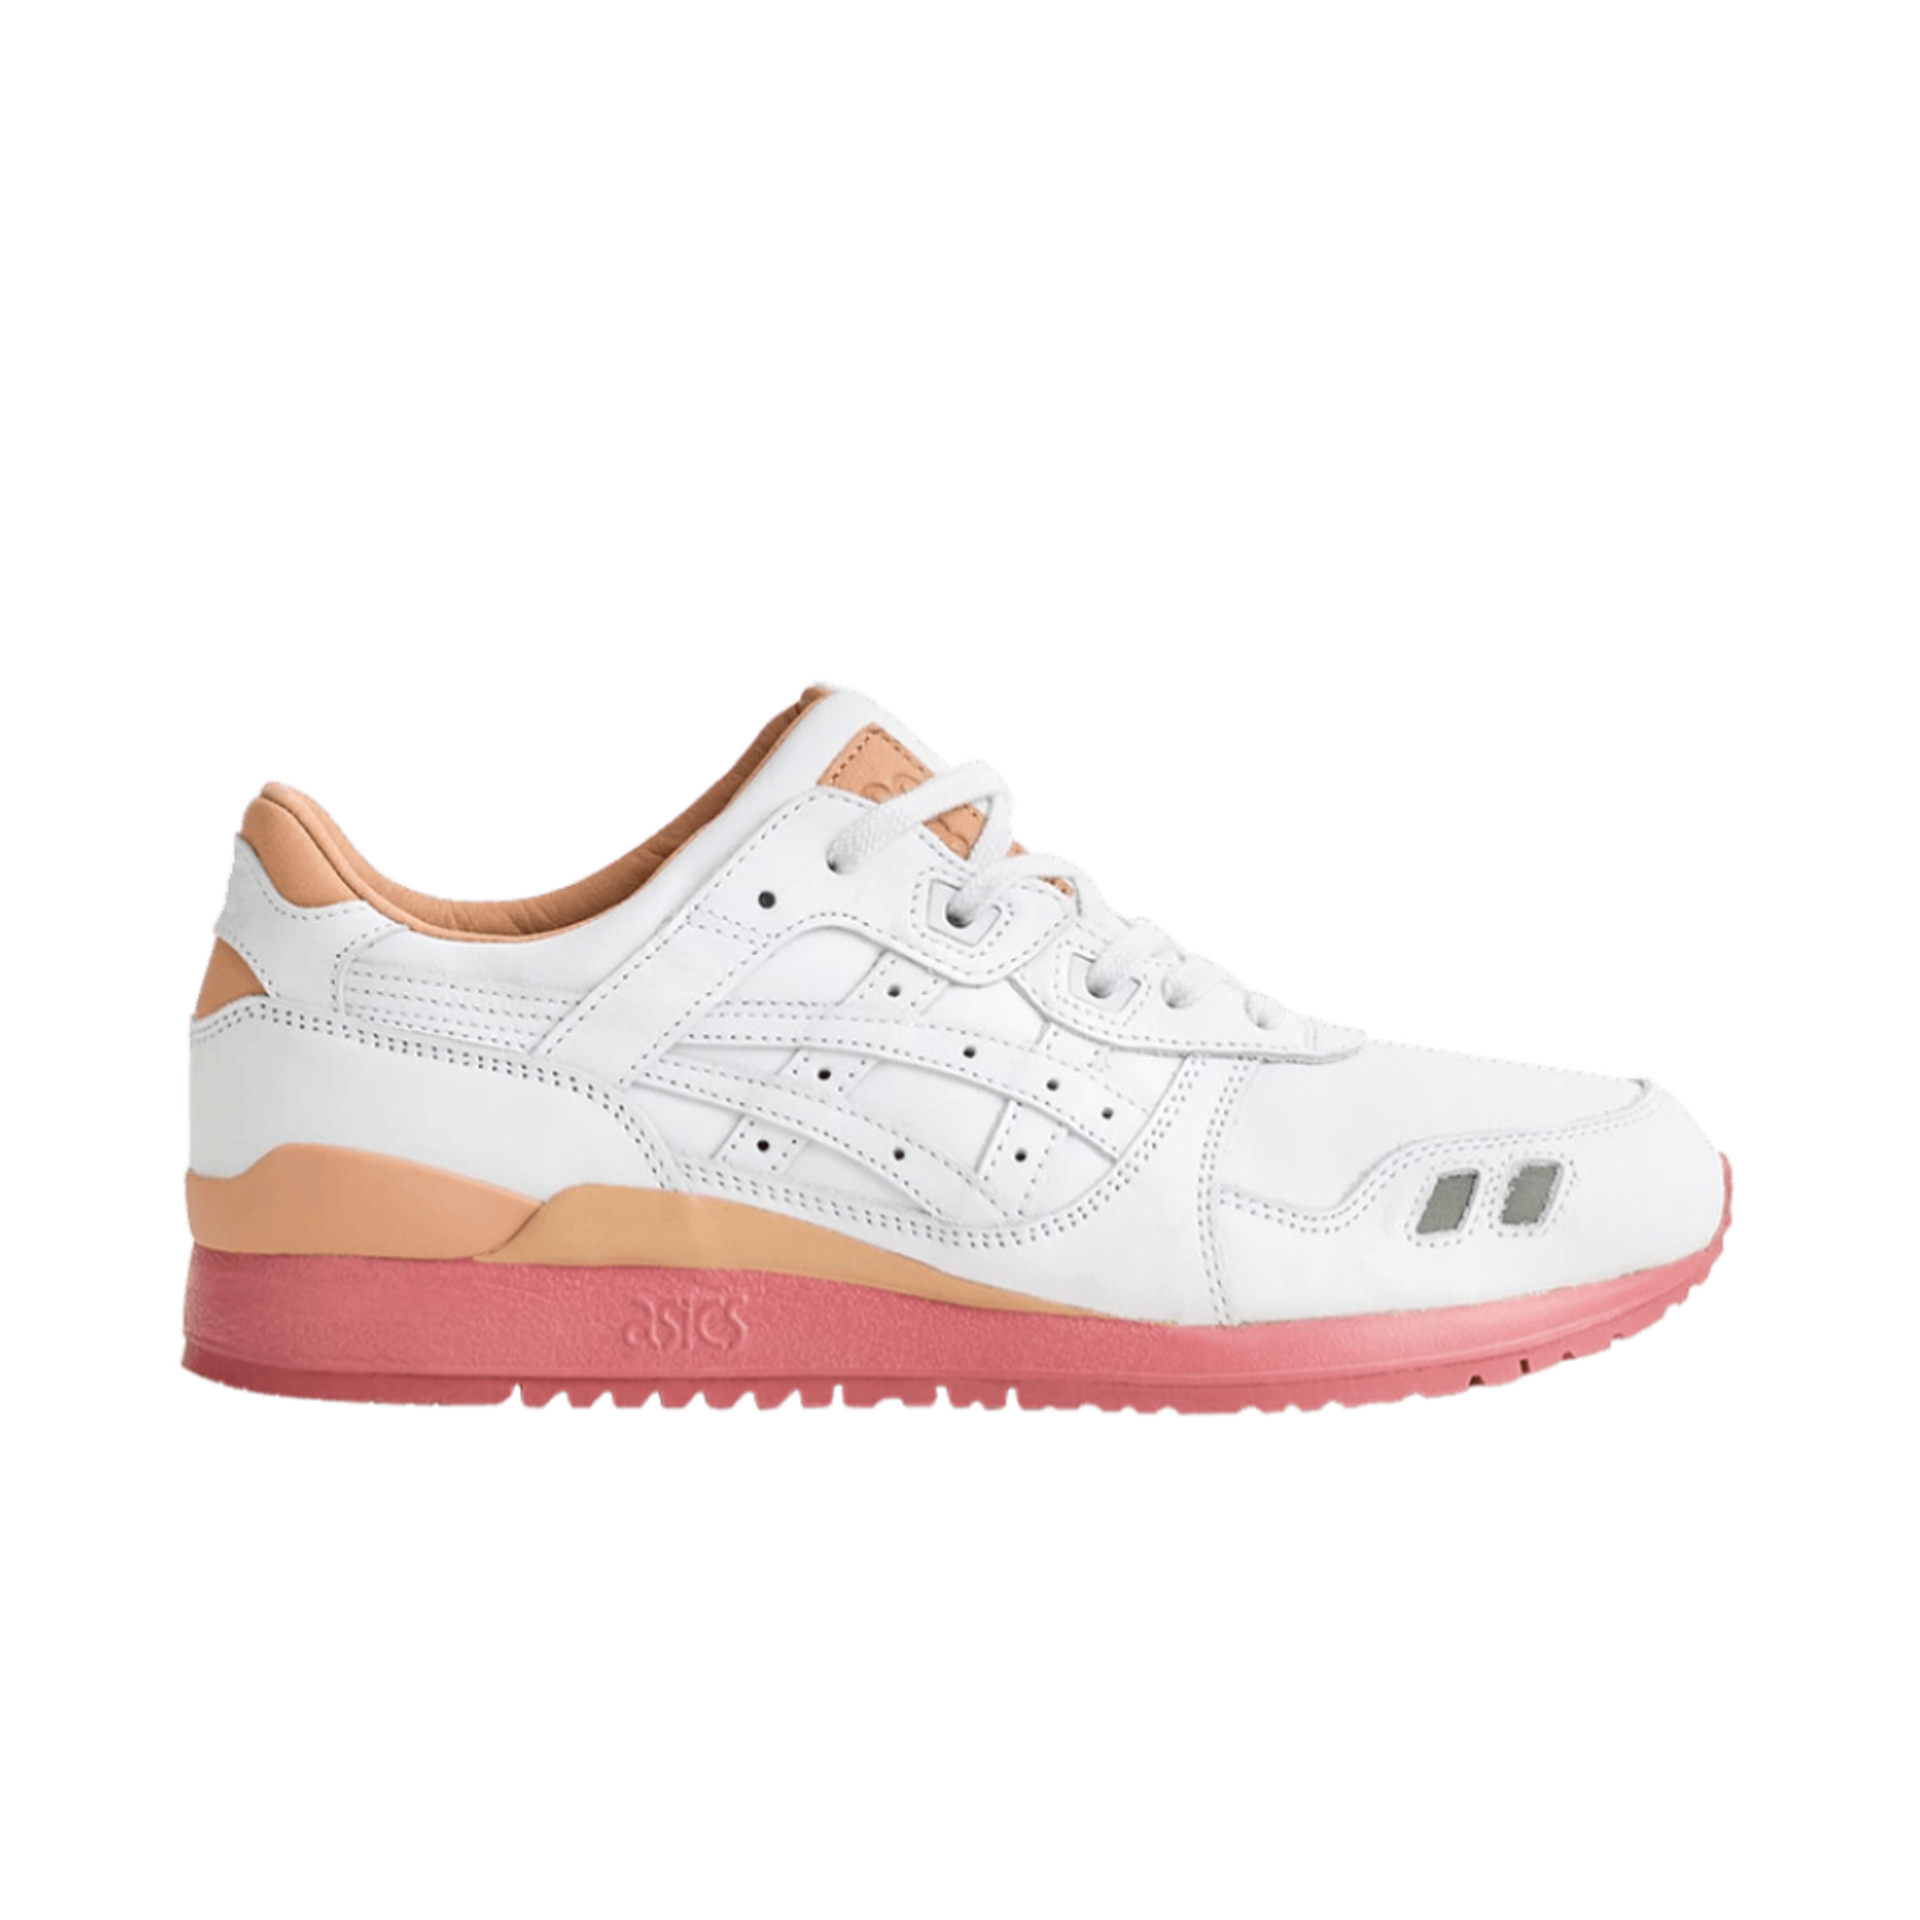 ASICS Packer Shoes x J.Crew x Gel Lyte 3 '1907 Collection White'